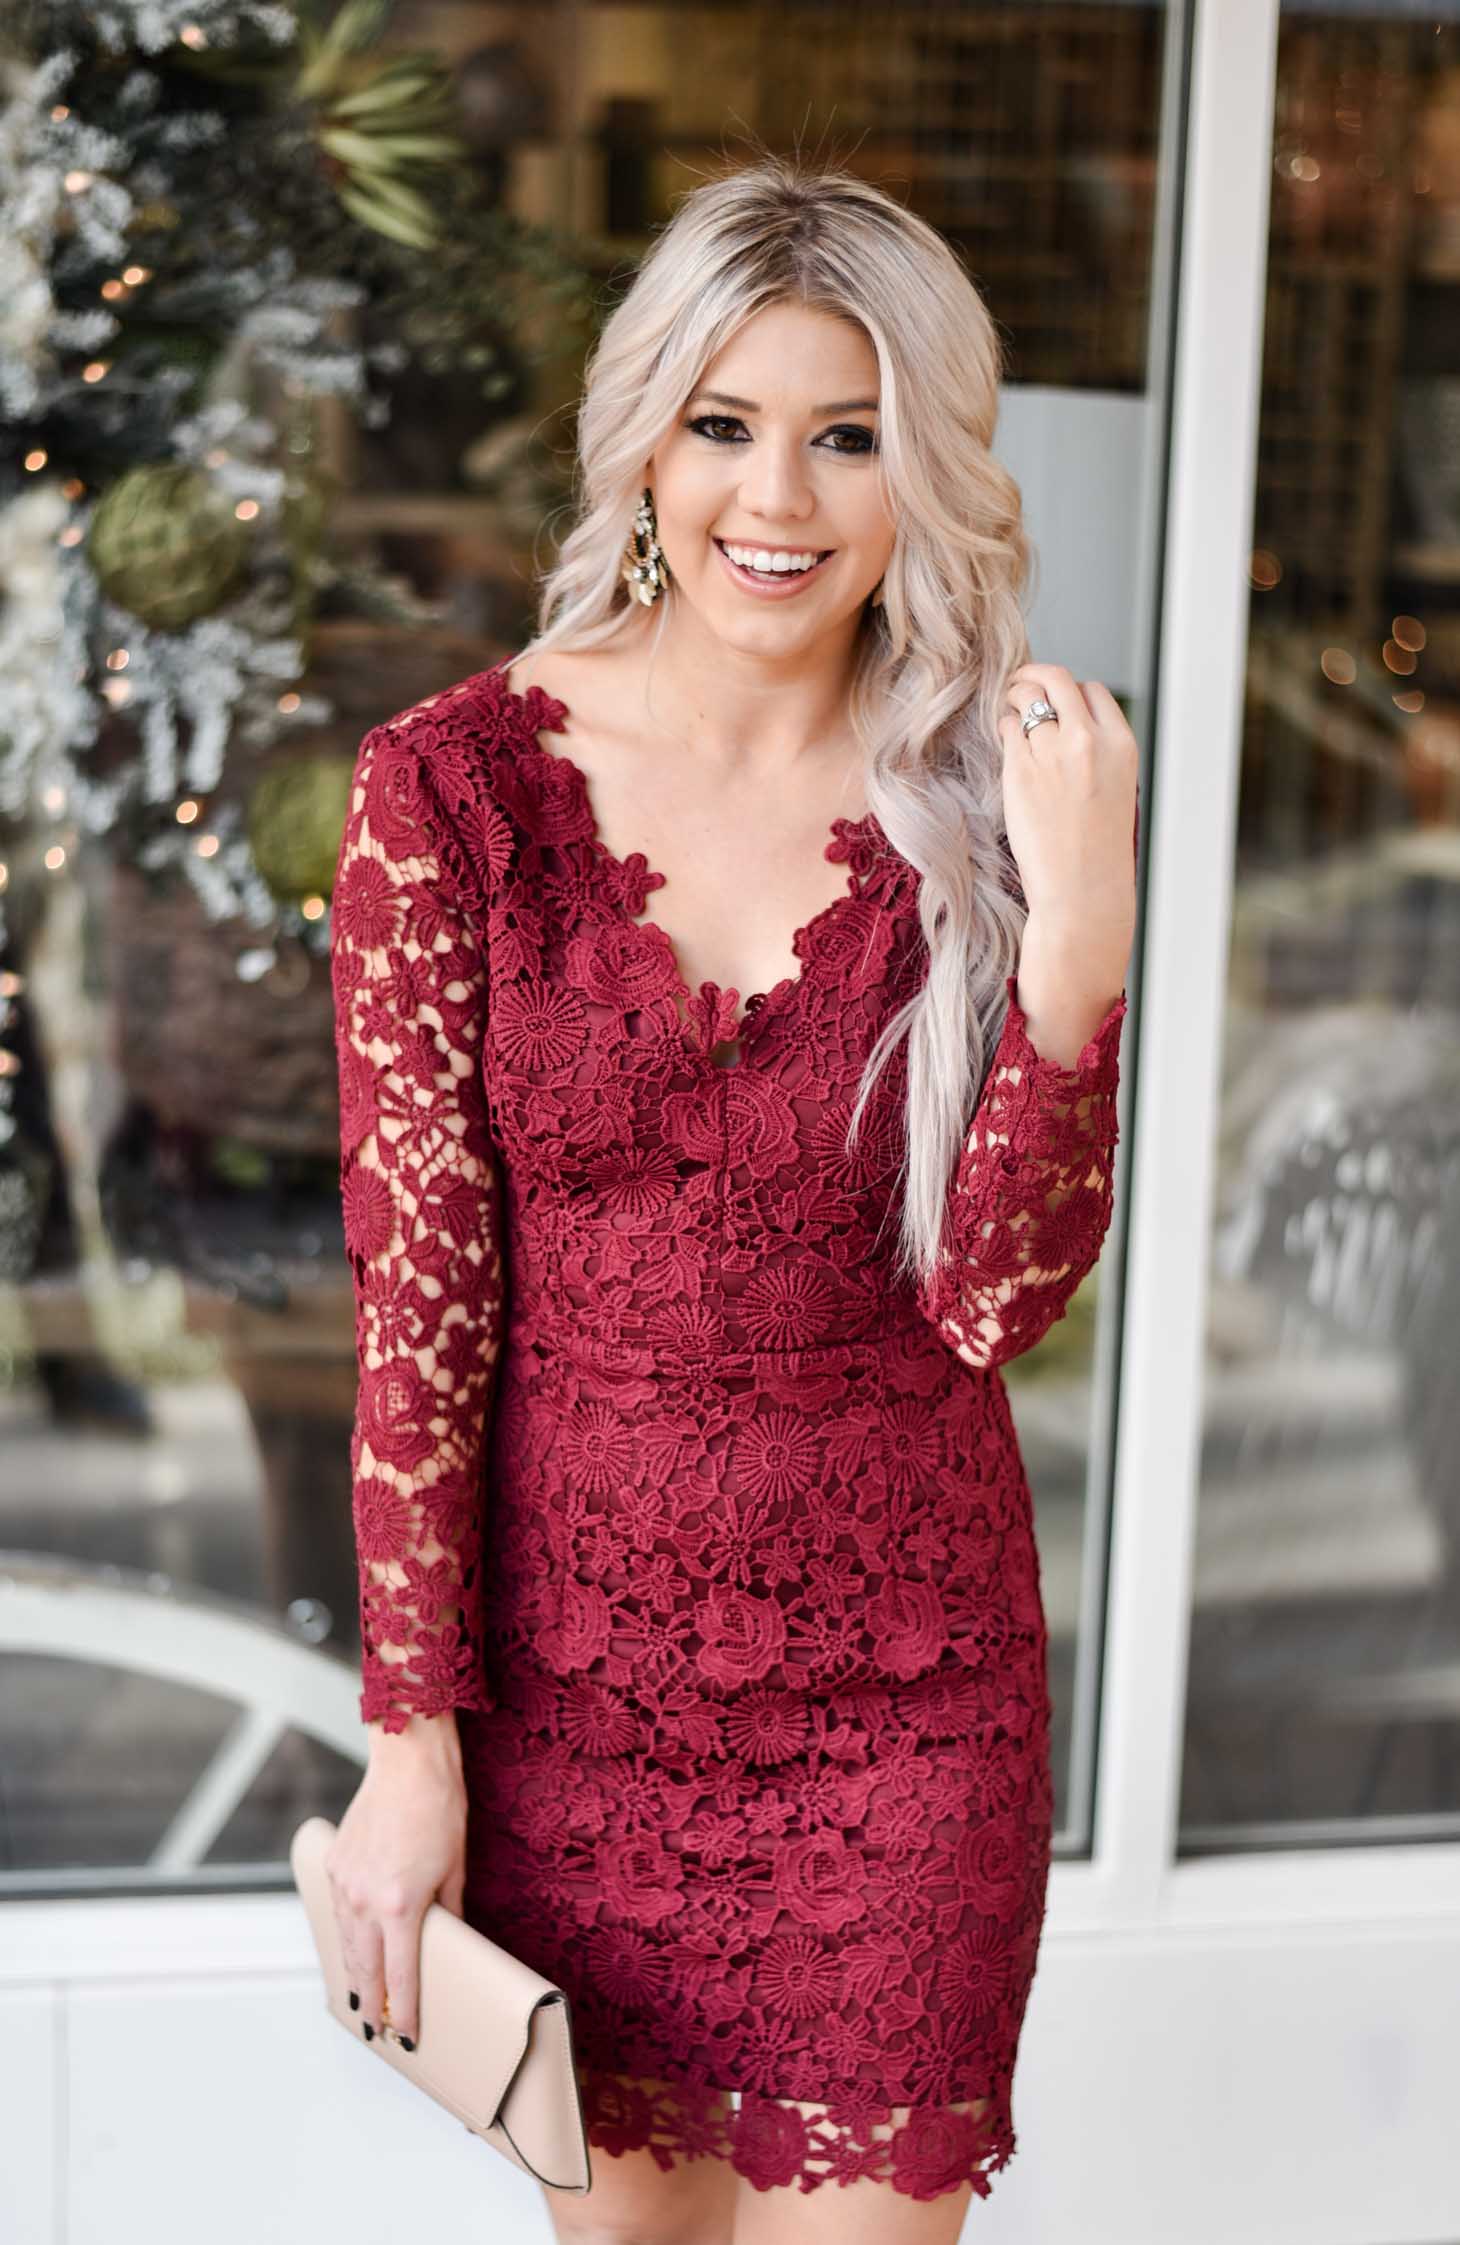 Erin Elizabeth of Wink and a Twirl shares the perfect holiday red lace dress for the holidays from Valentina Boulevard